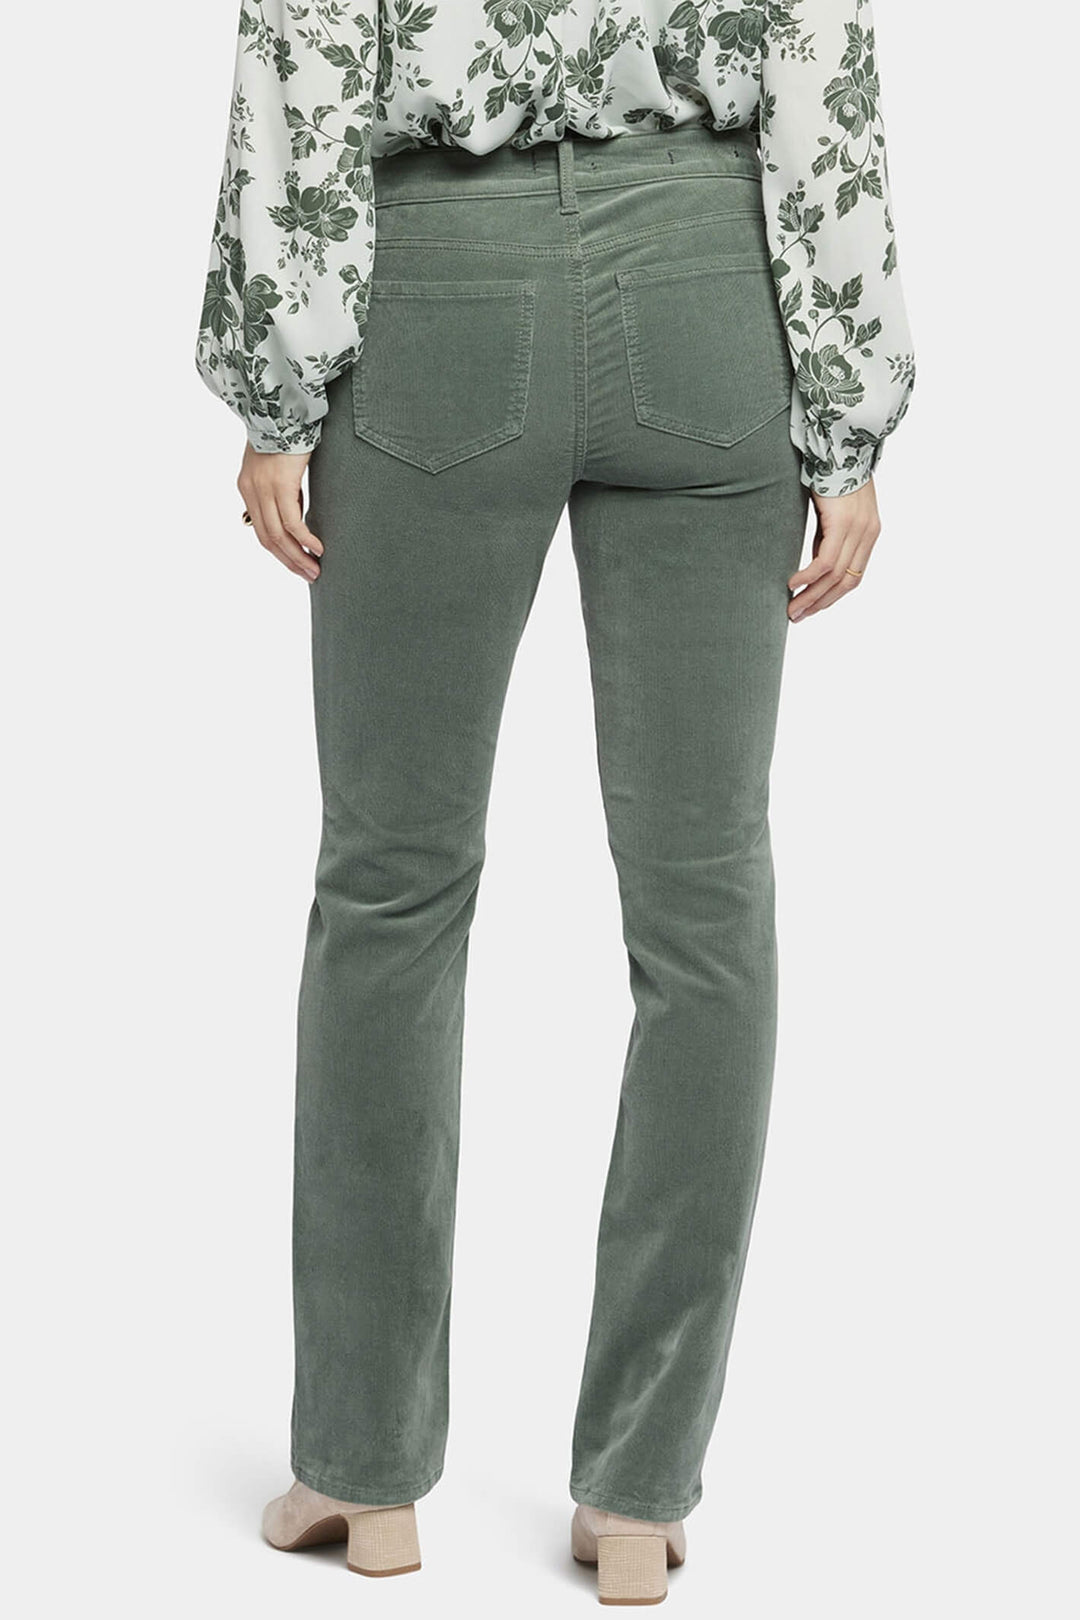 NYDJ Marilyn MBCRMS2299 Sage Green Straight Corduroy Jeans - Shirley Allum Boutique